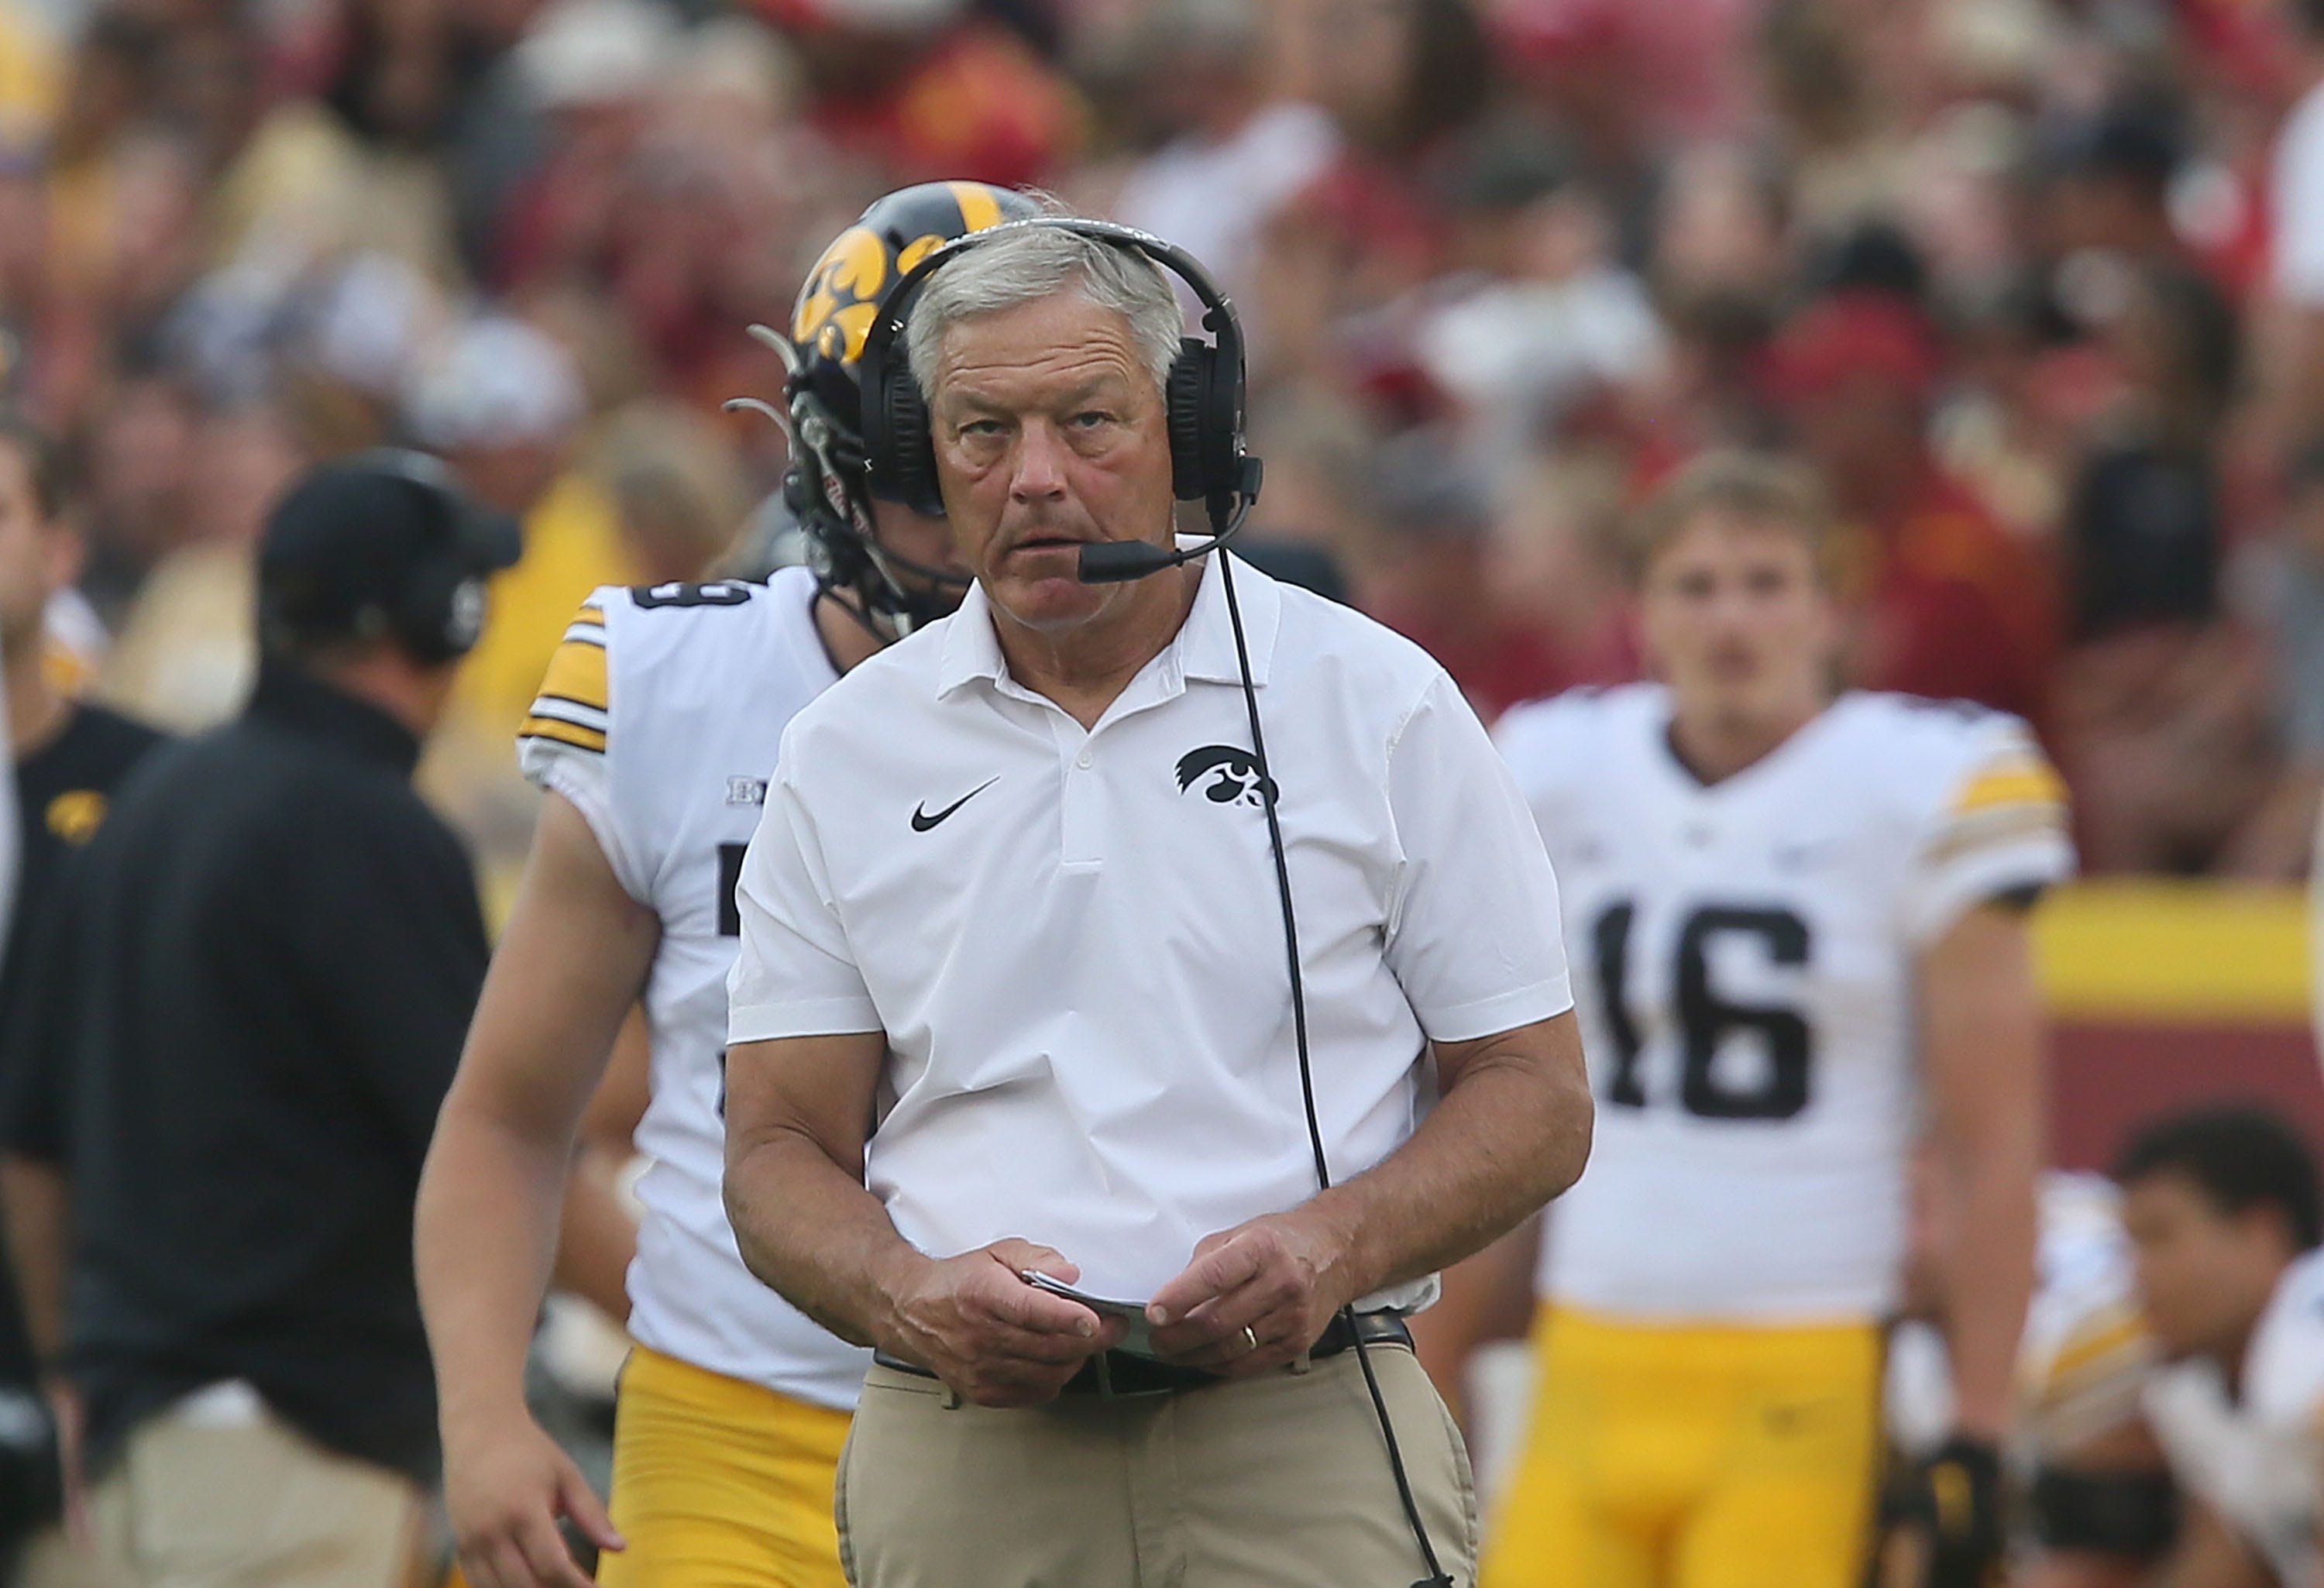 former duke oc kevin johns reportedly interviewing for iowa hawkeyes' position